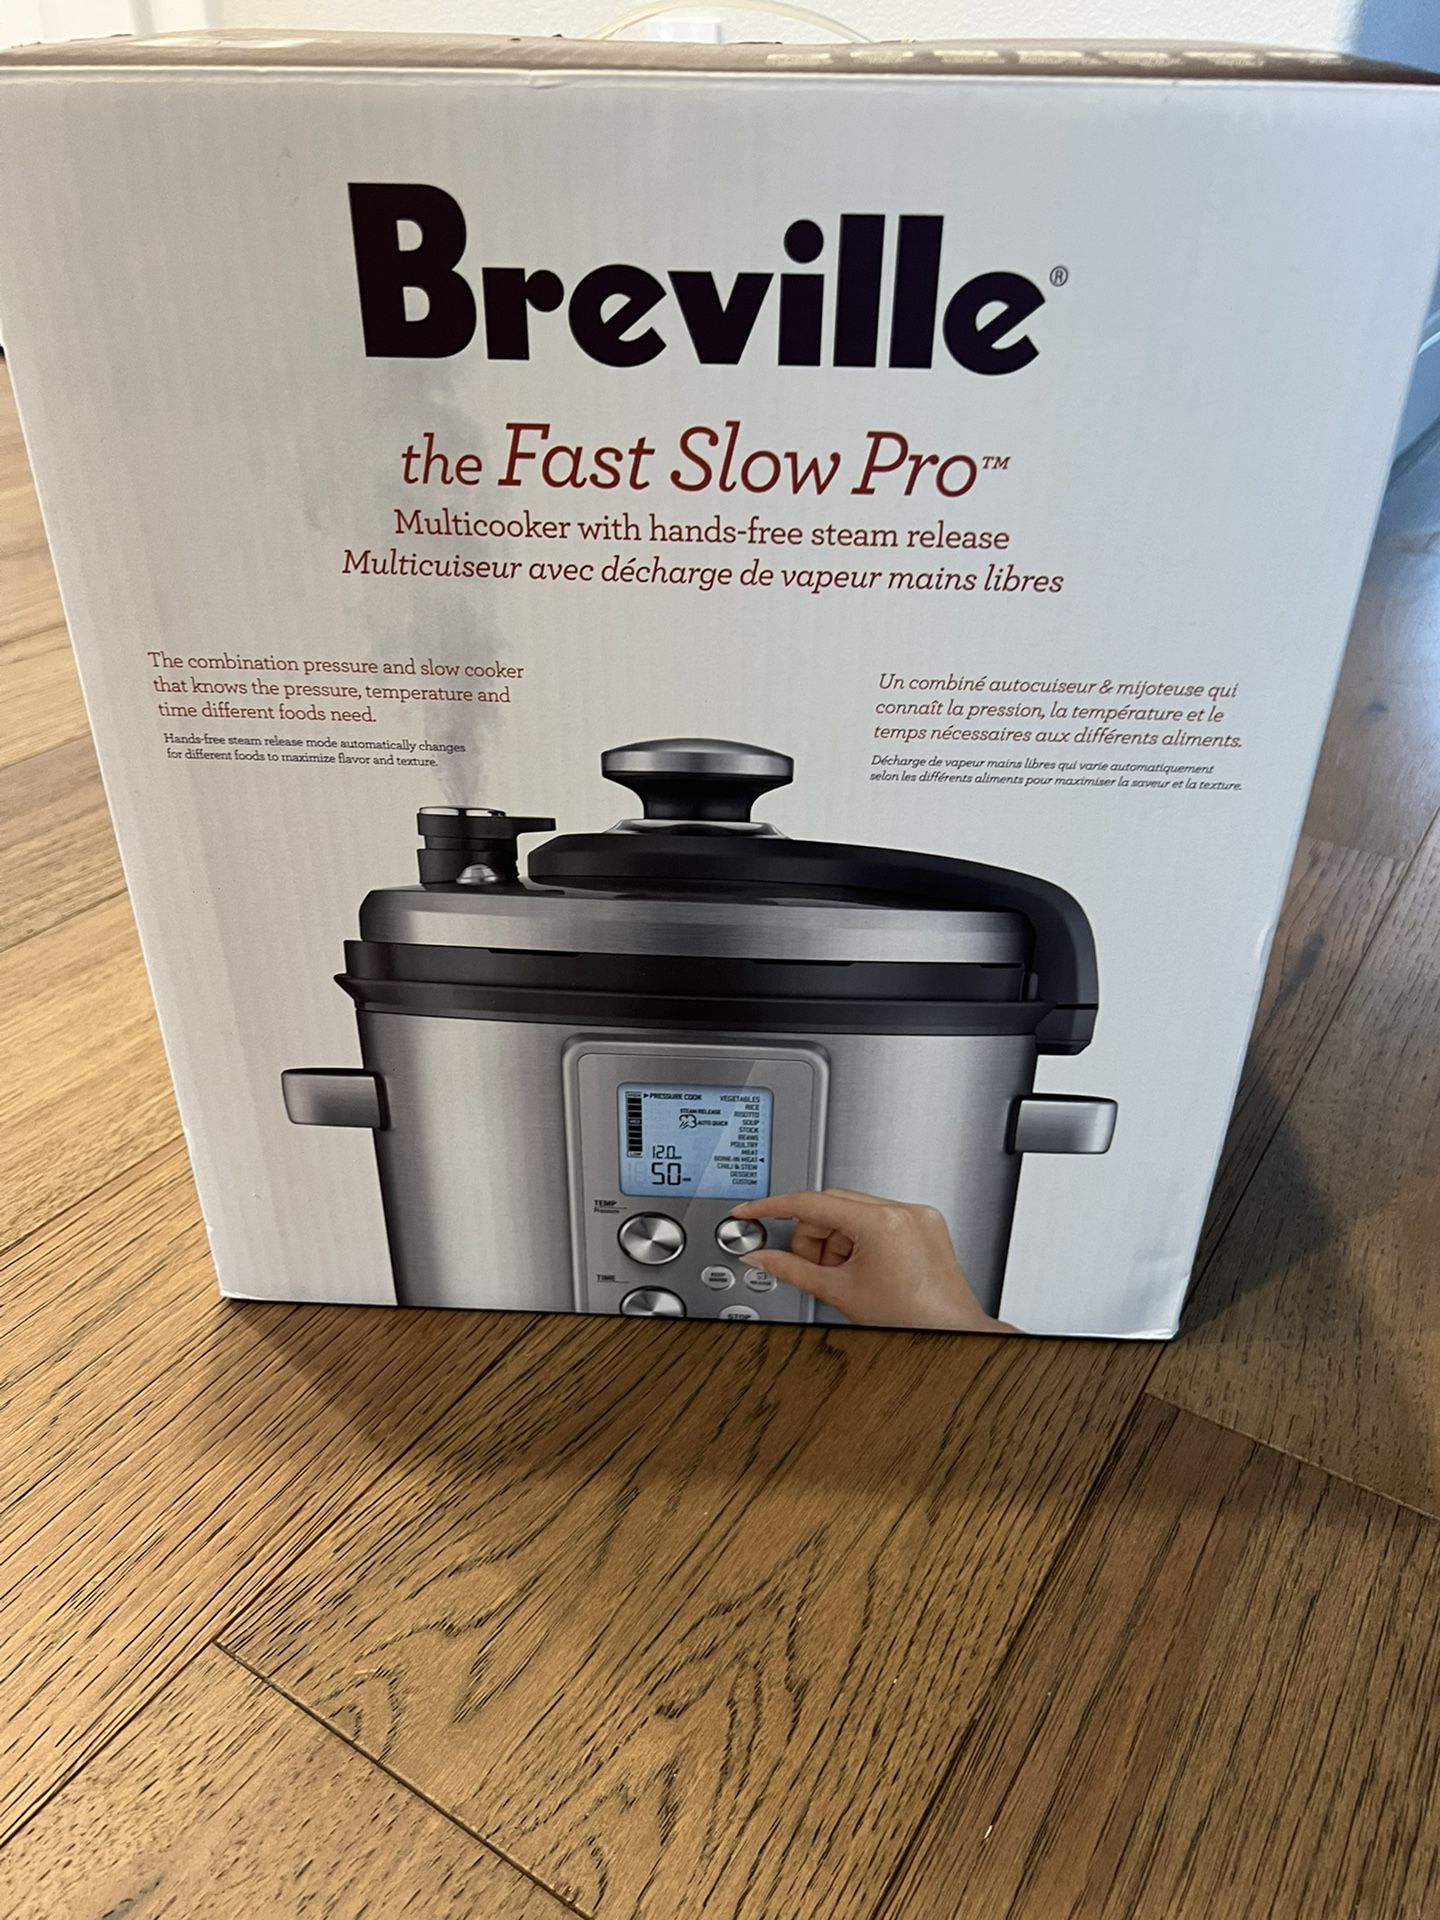  Breville BPR700BSS Fast Slow Pro Slow Cooker, Brushed Stainless  Steel: Home & Kitchen